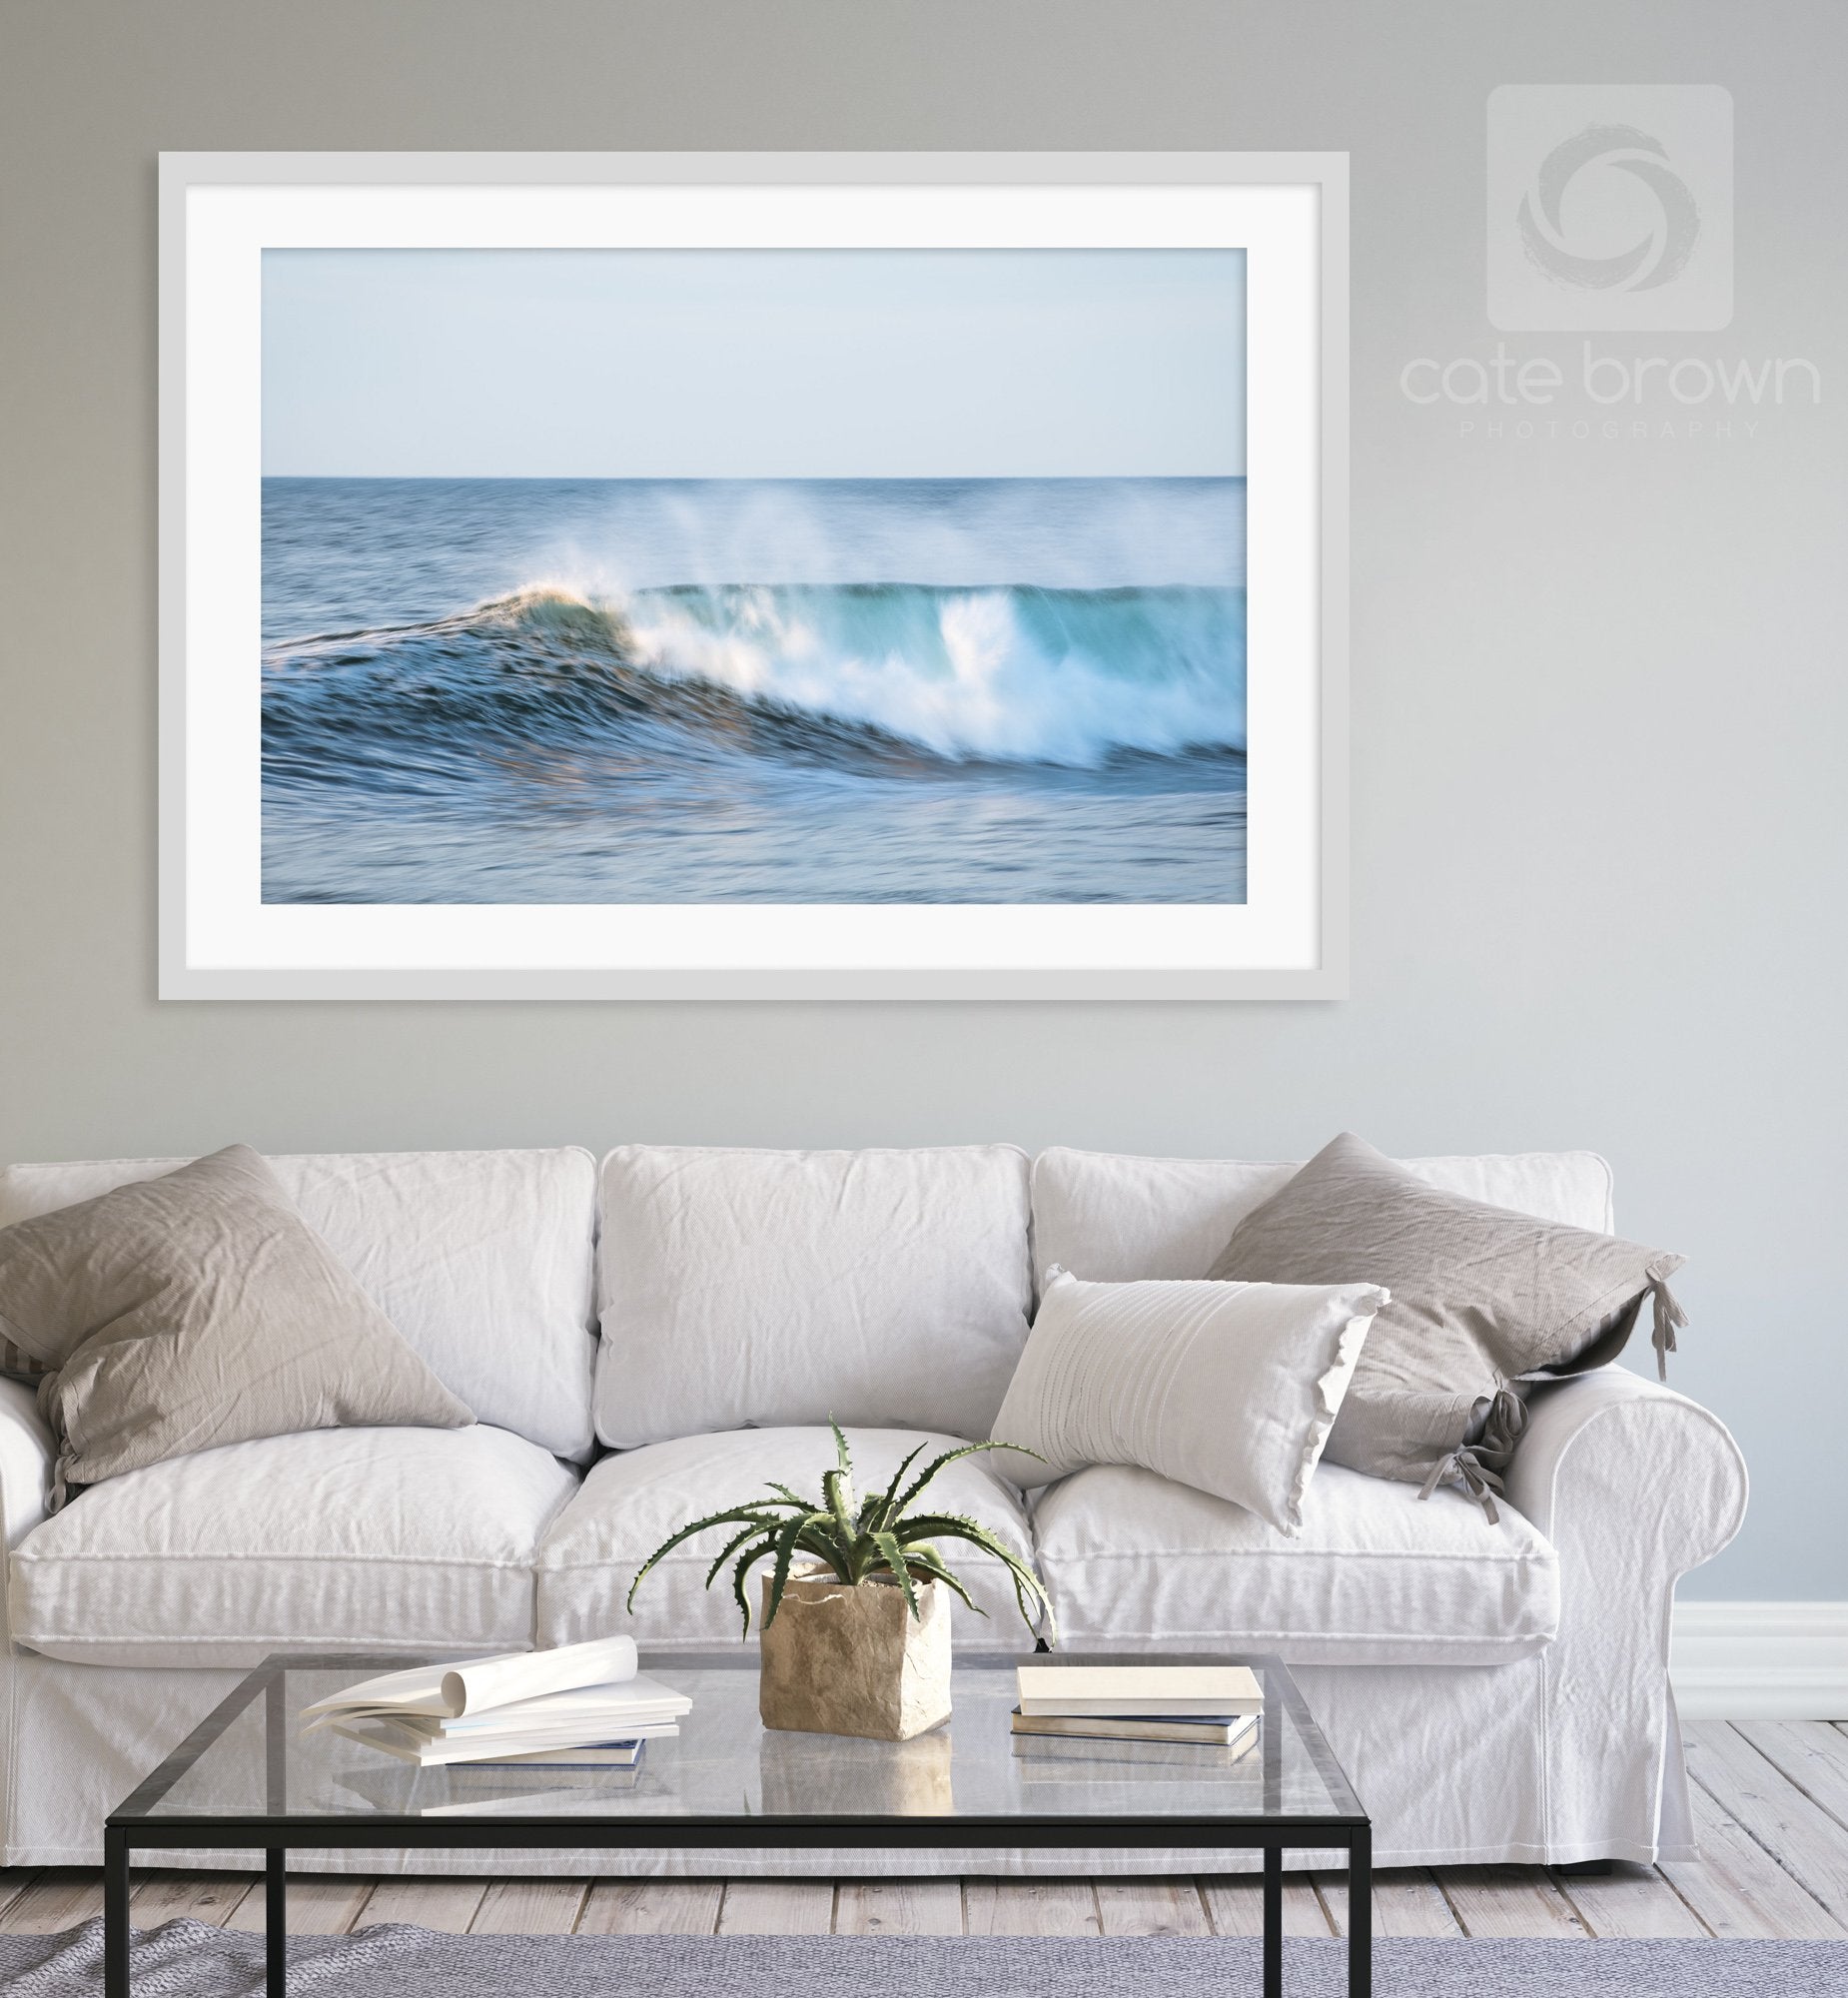 Cate Brown Photo Beautiful Chaos  //  Ocean Photography Made to Order Ocean Fine Art